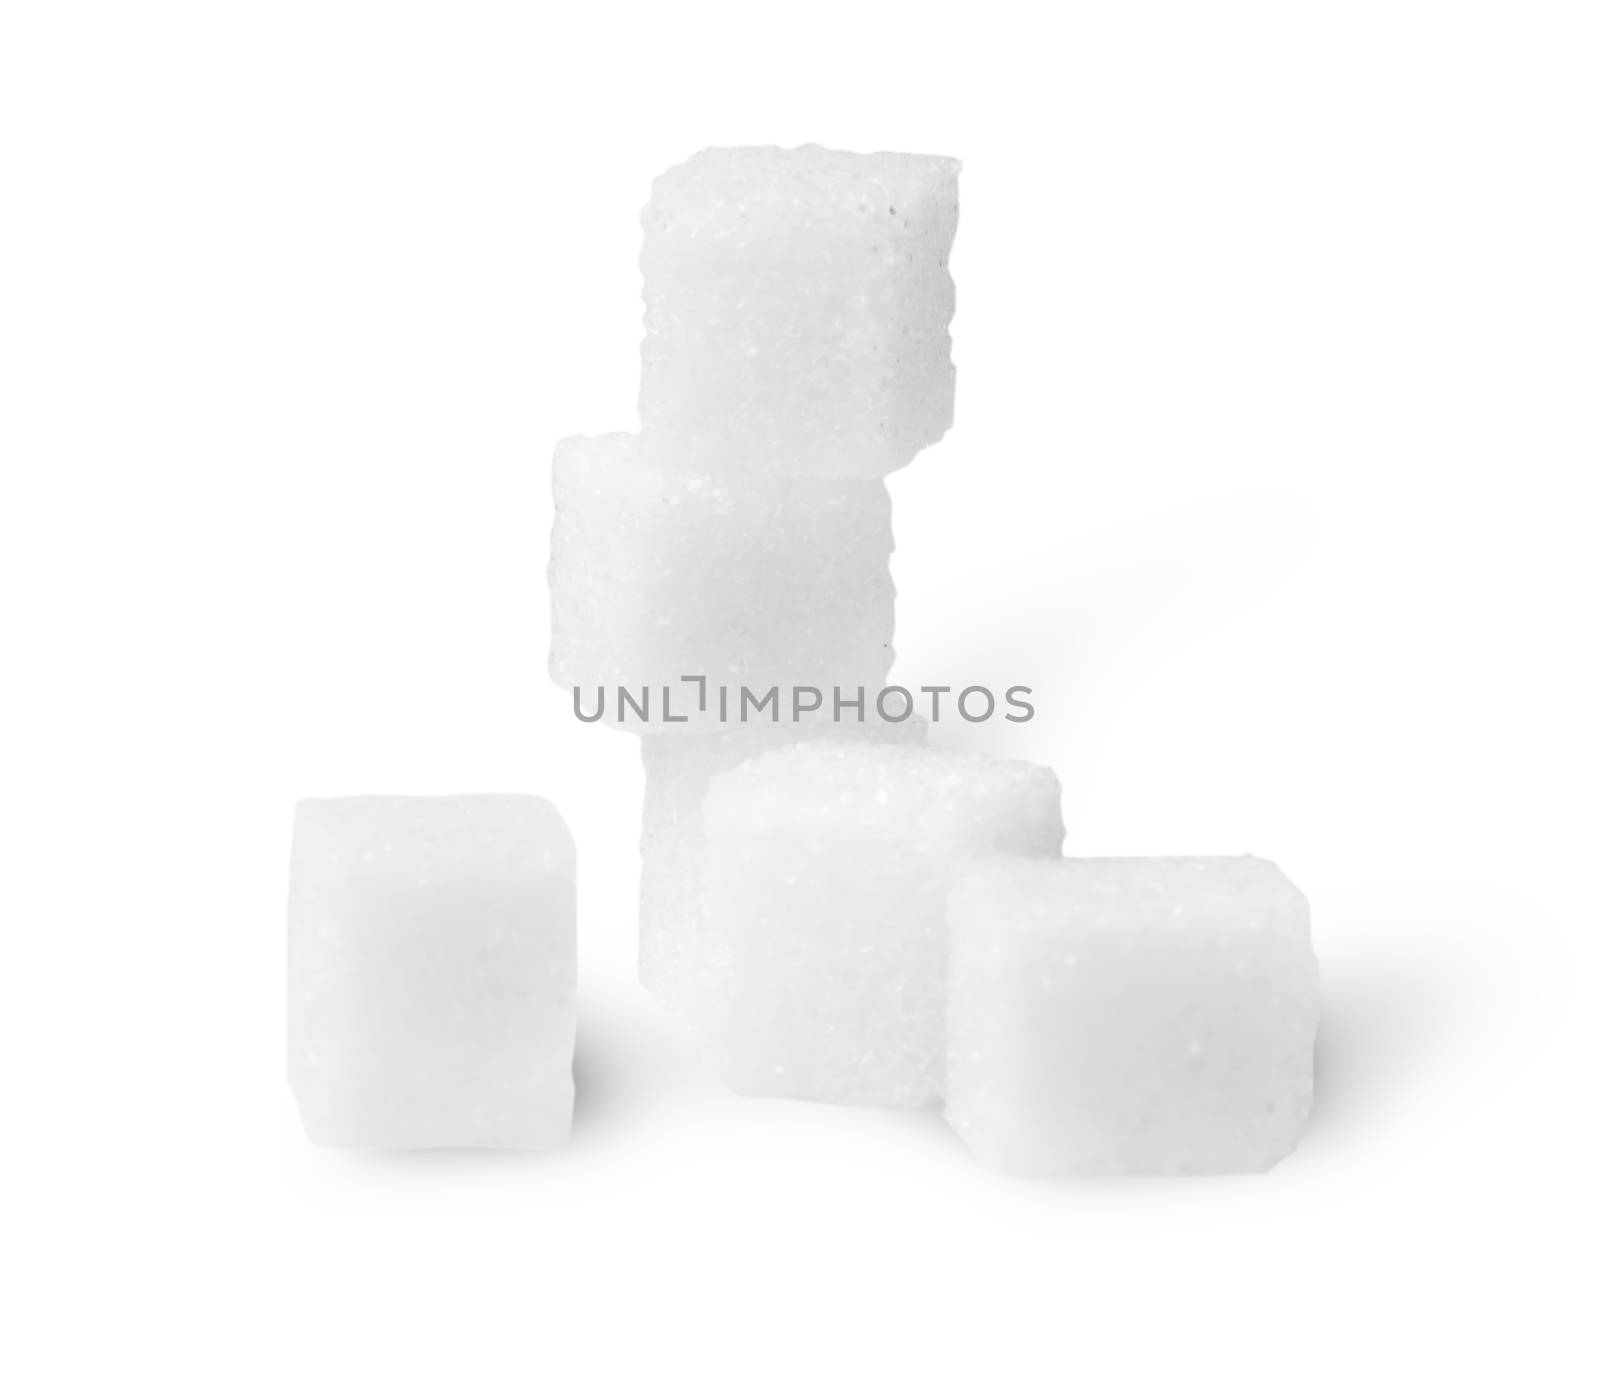 Some Sugar Cubes Isolated On White Background